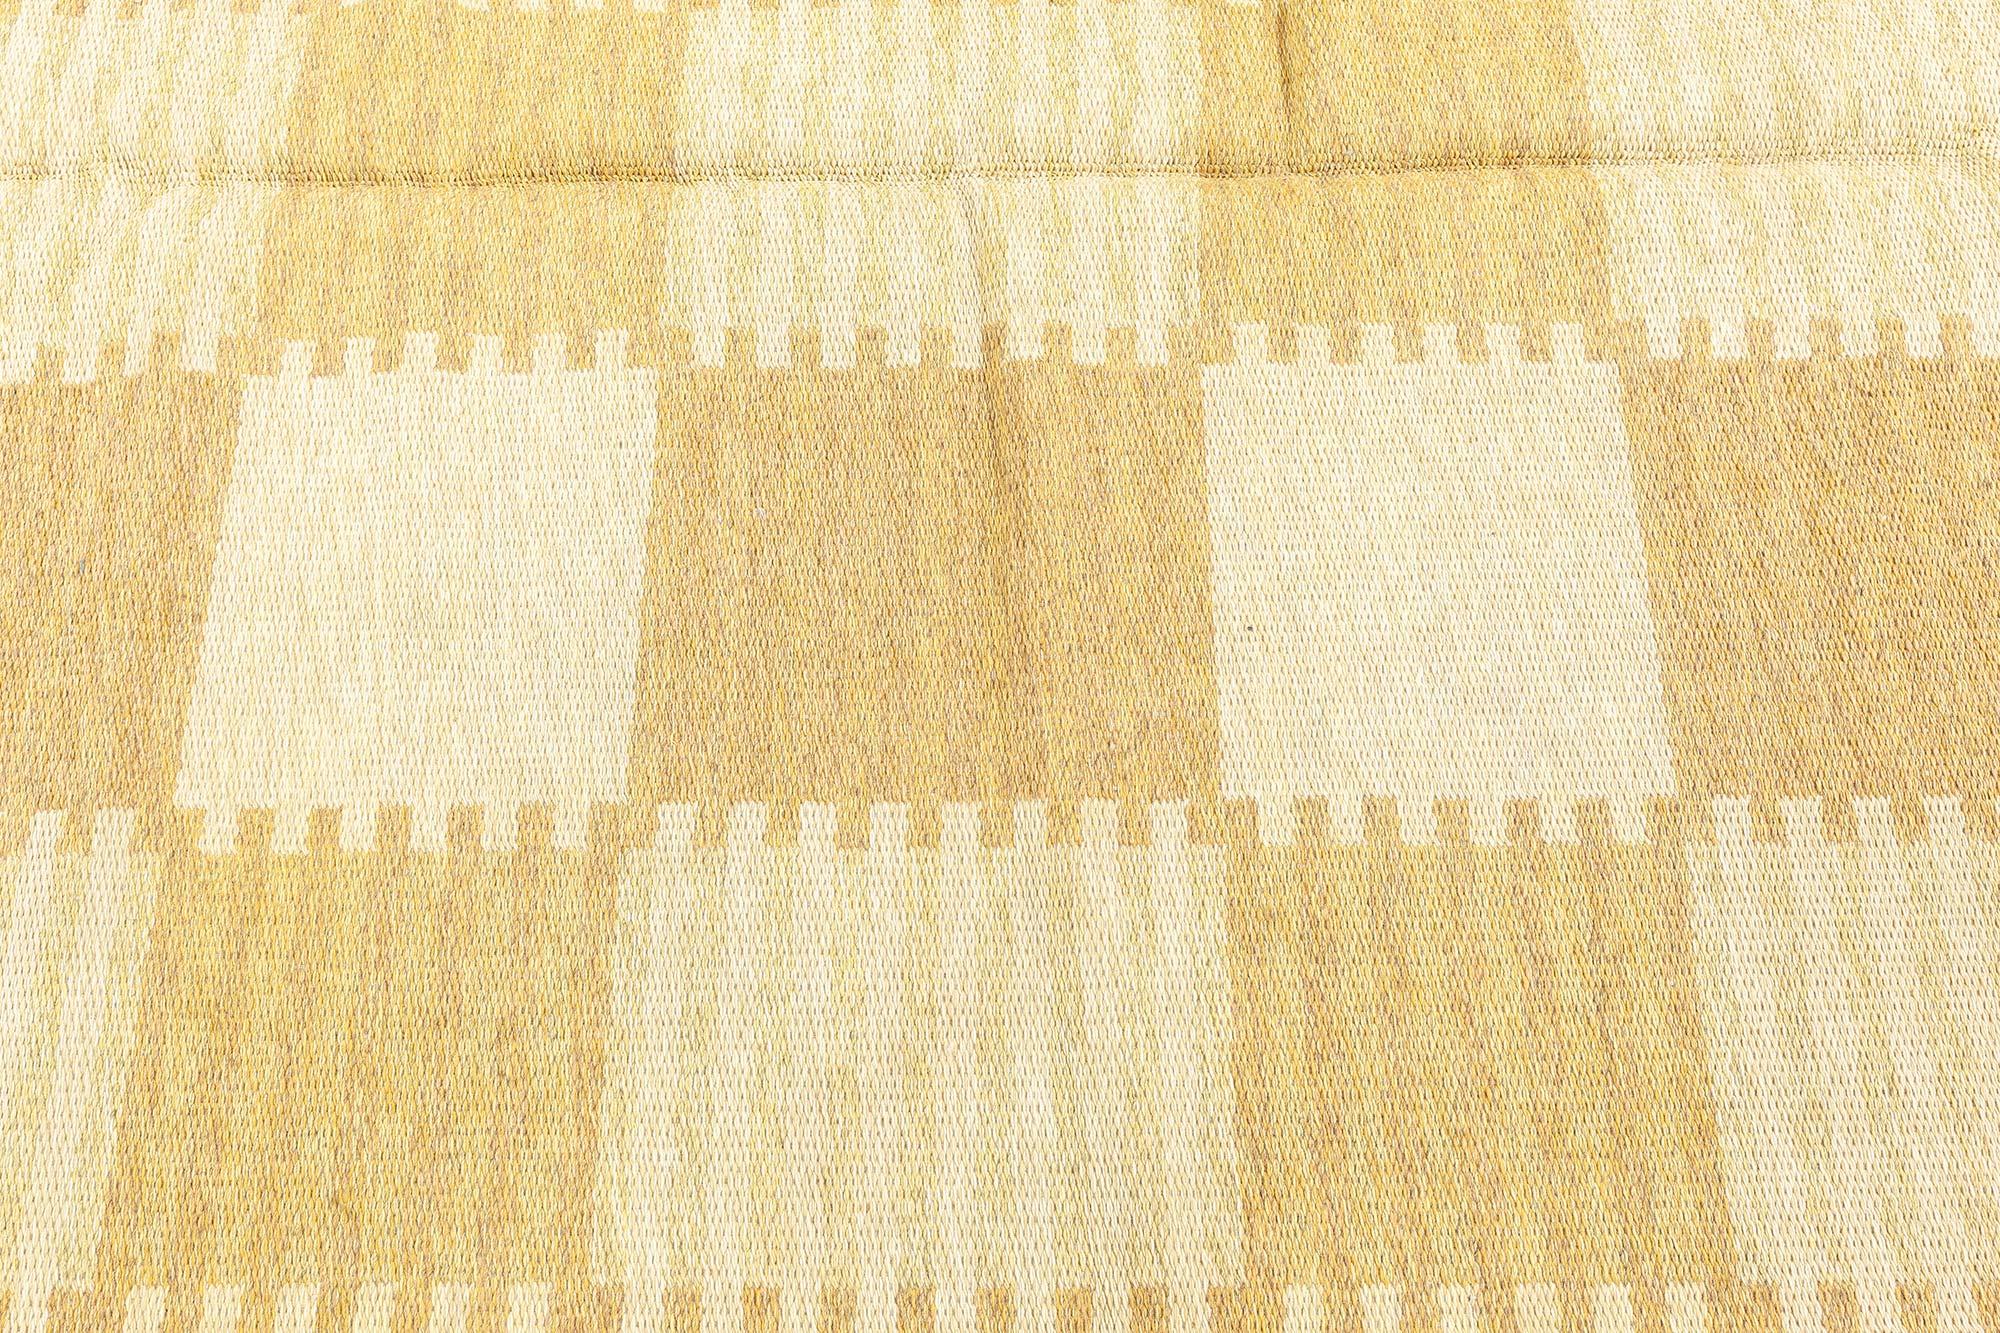 Mid-20th century double sided mustard yellow Swedish flat-weave wool rug
Size: 5'4